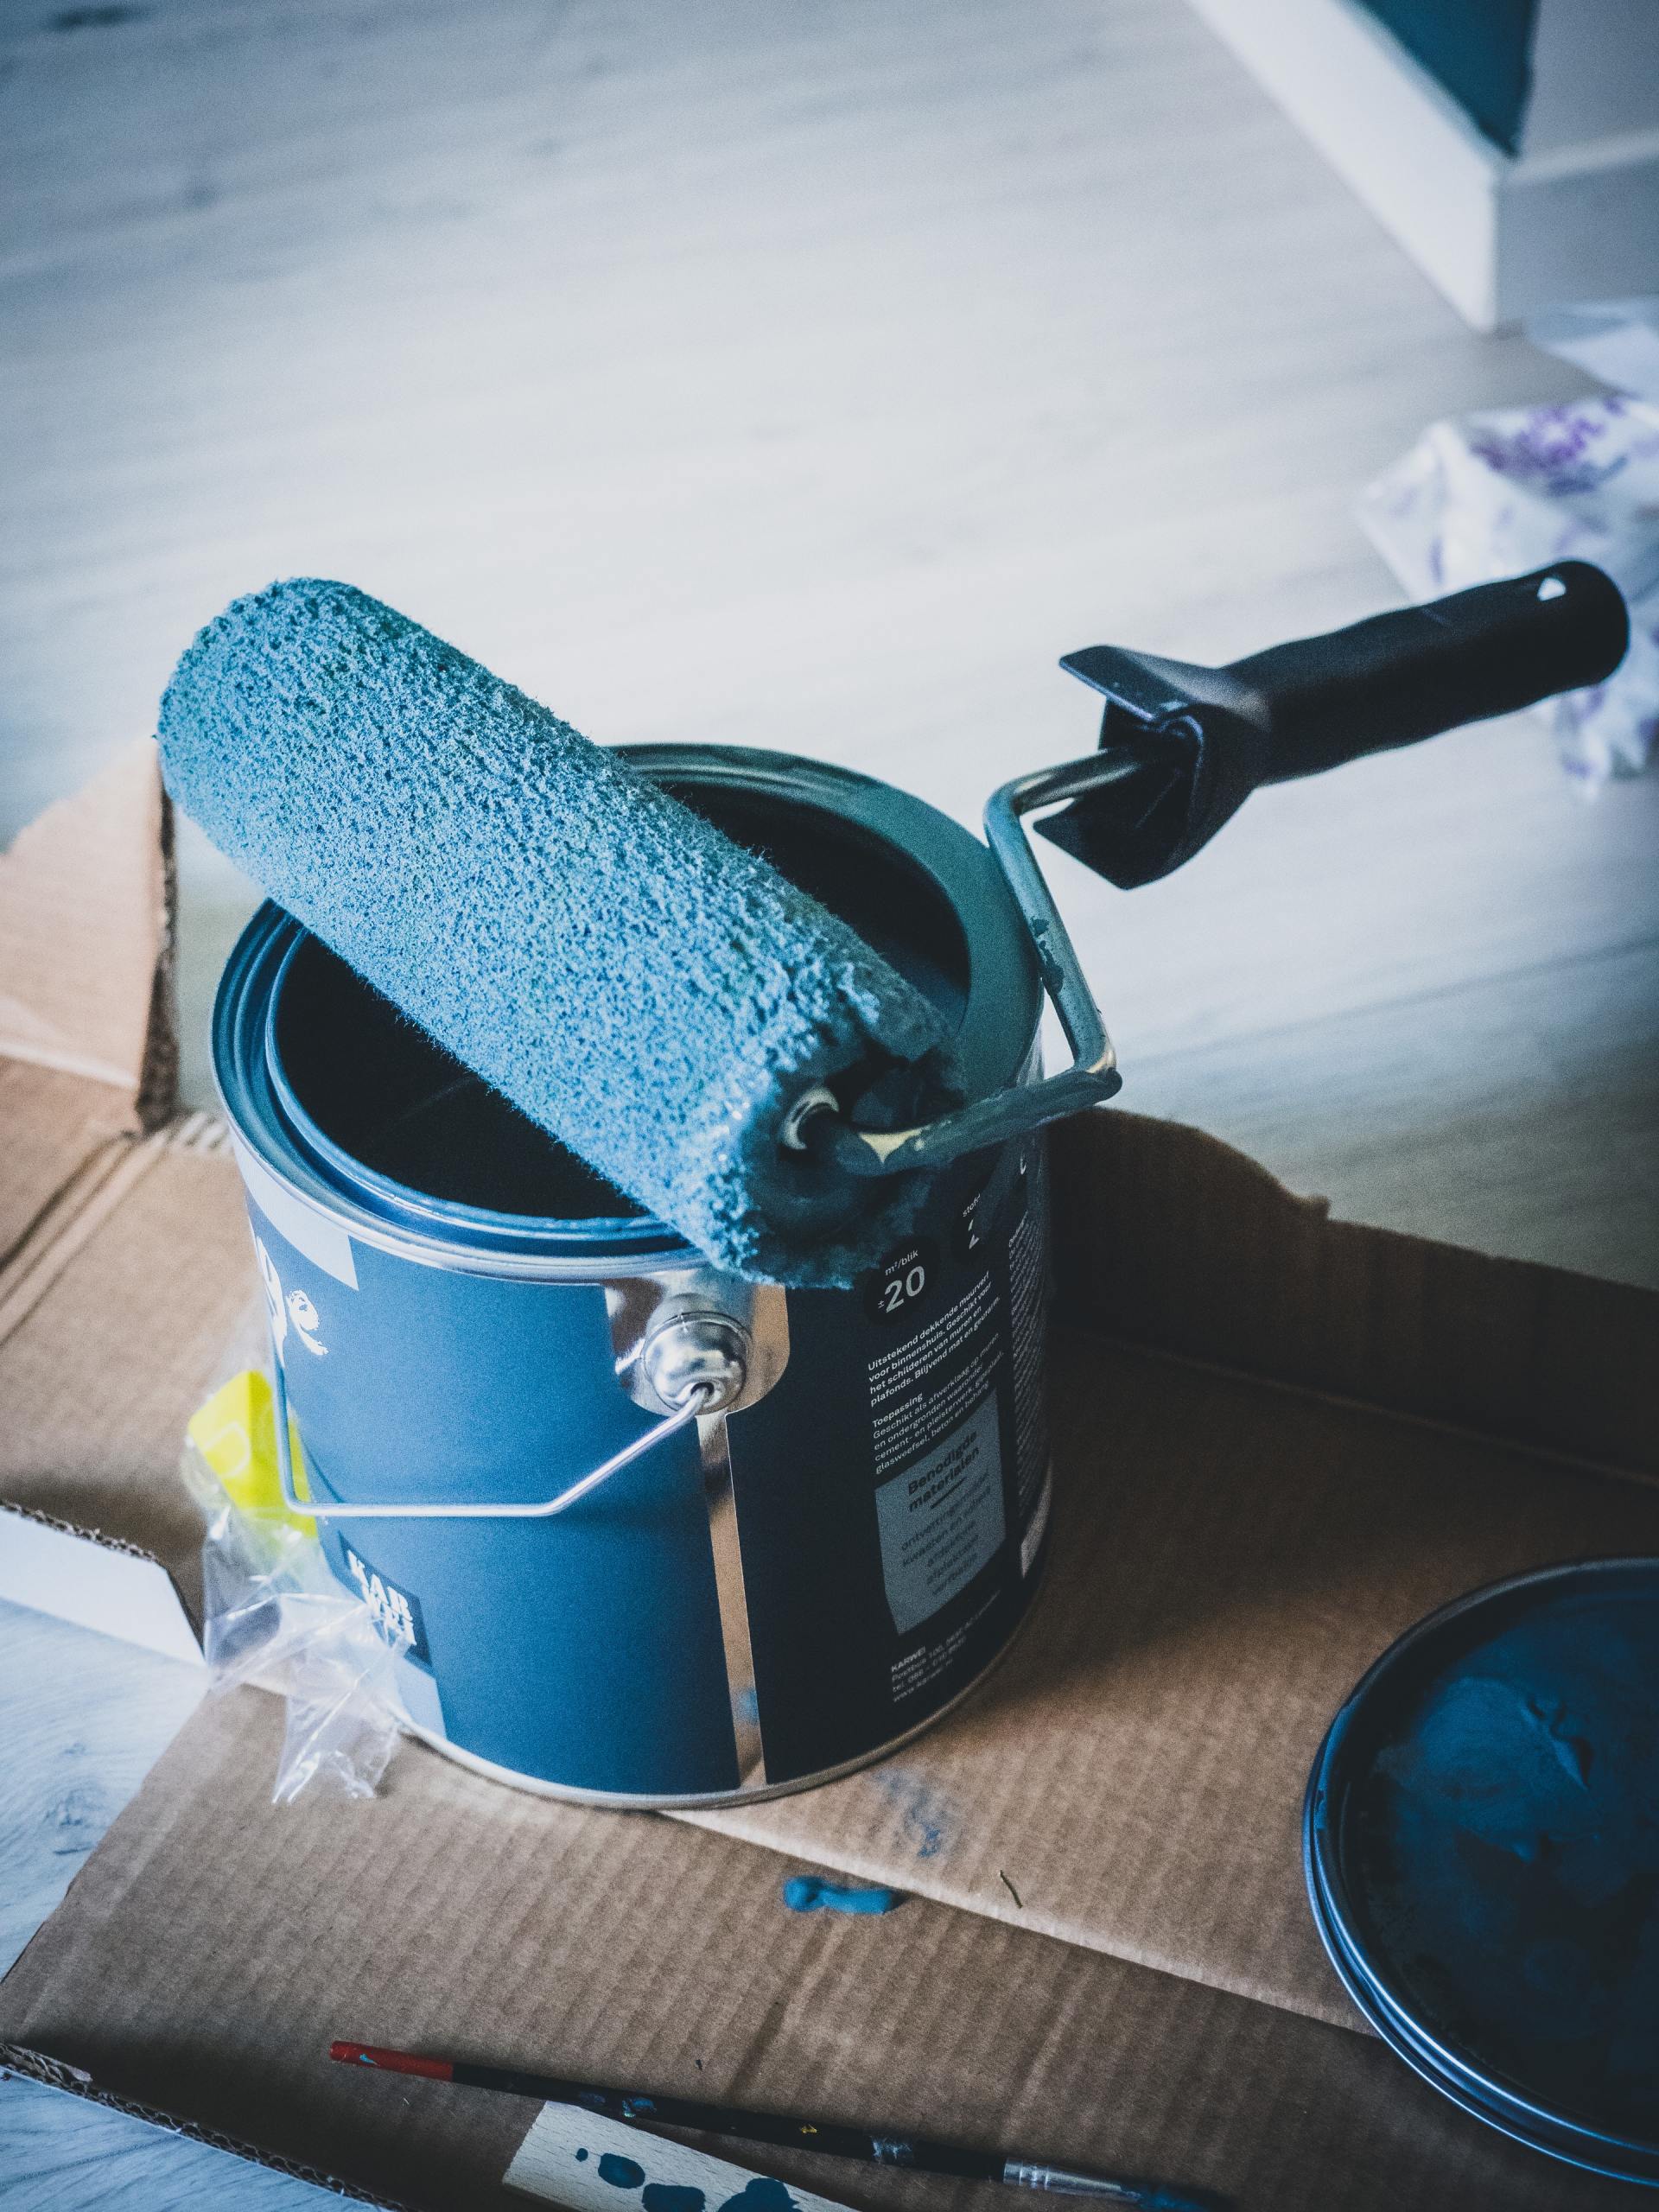 Picture of a paint roller covered in blue paint, on top of a blue paint bucket.